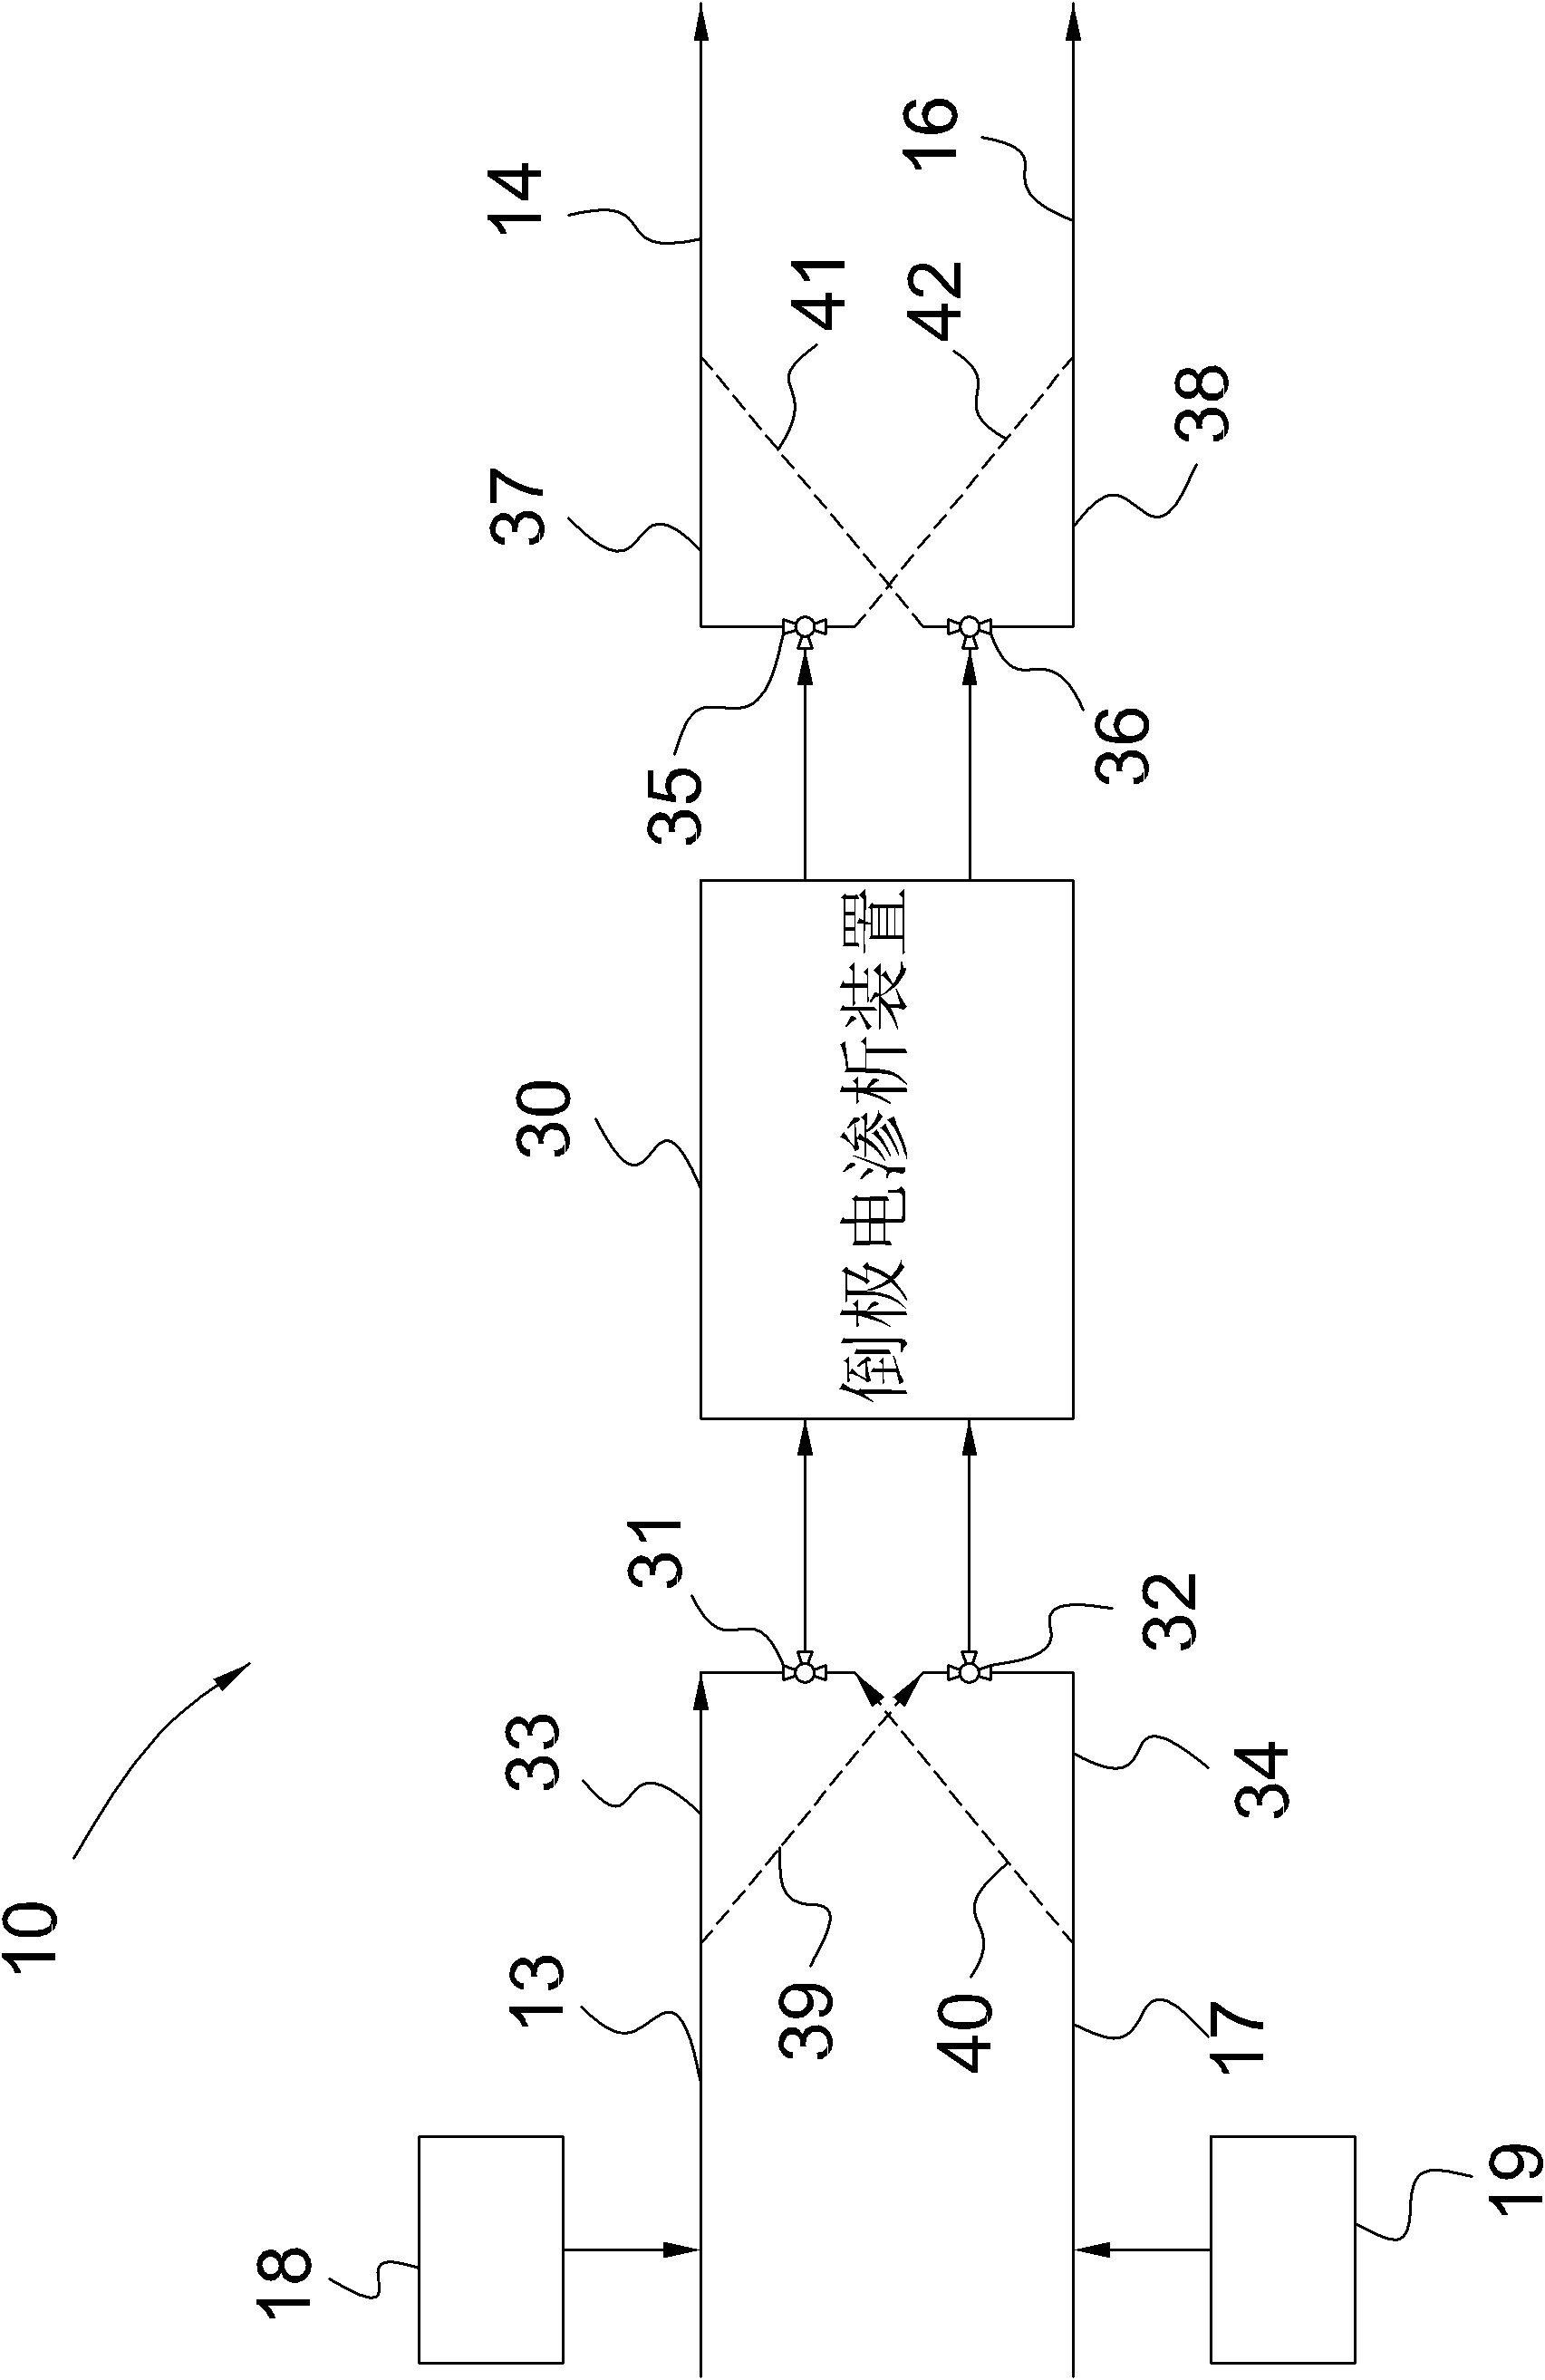 Desalting system and method